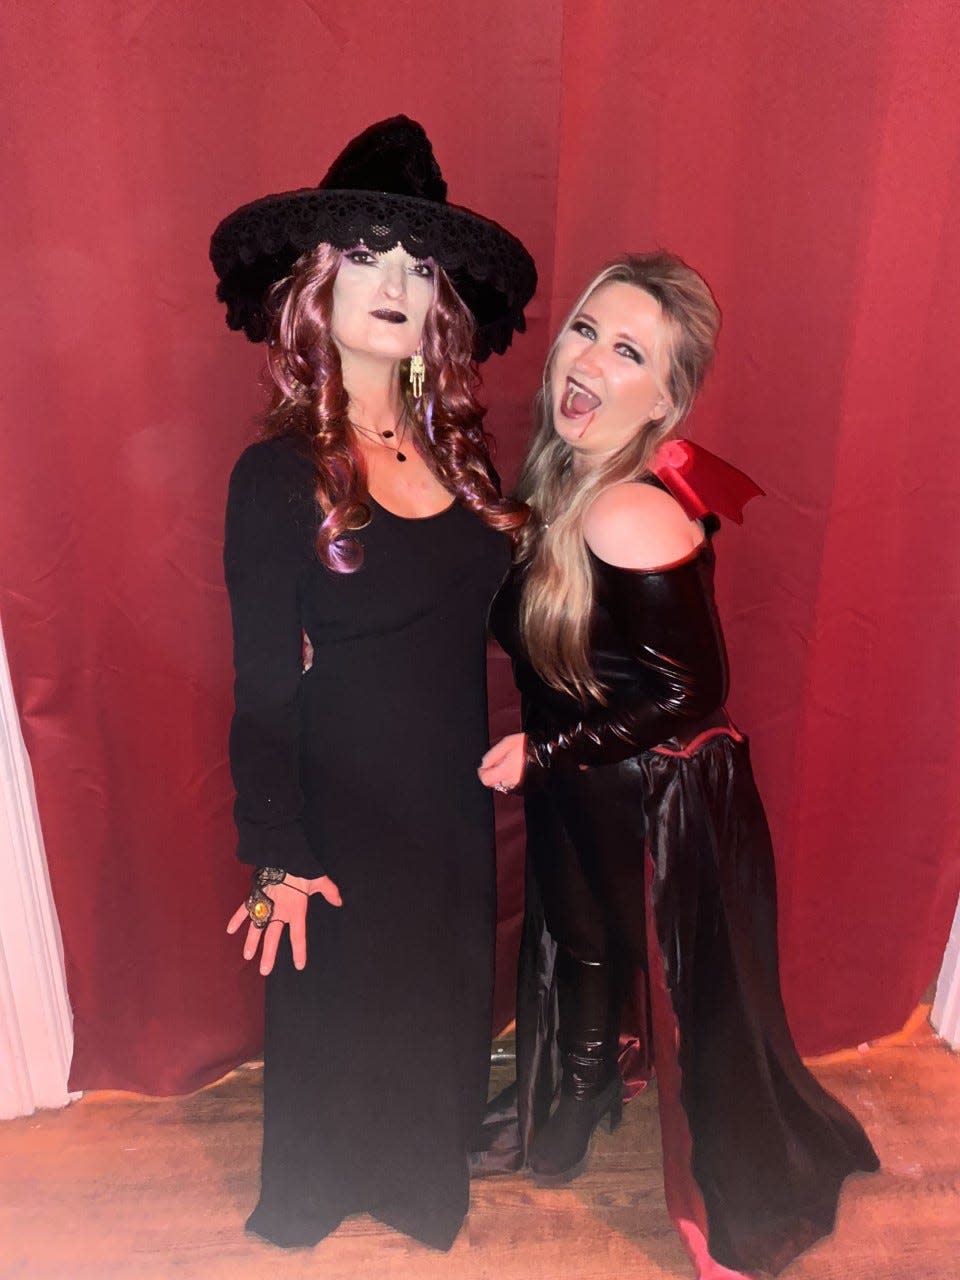 Justine Roderick, left, and Elvina Medeiros are among the characters to be found at the Haunted House created by the Academy of Performing Arts in Orleans.